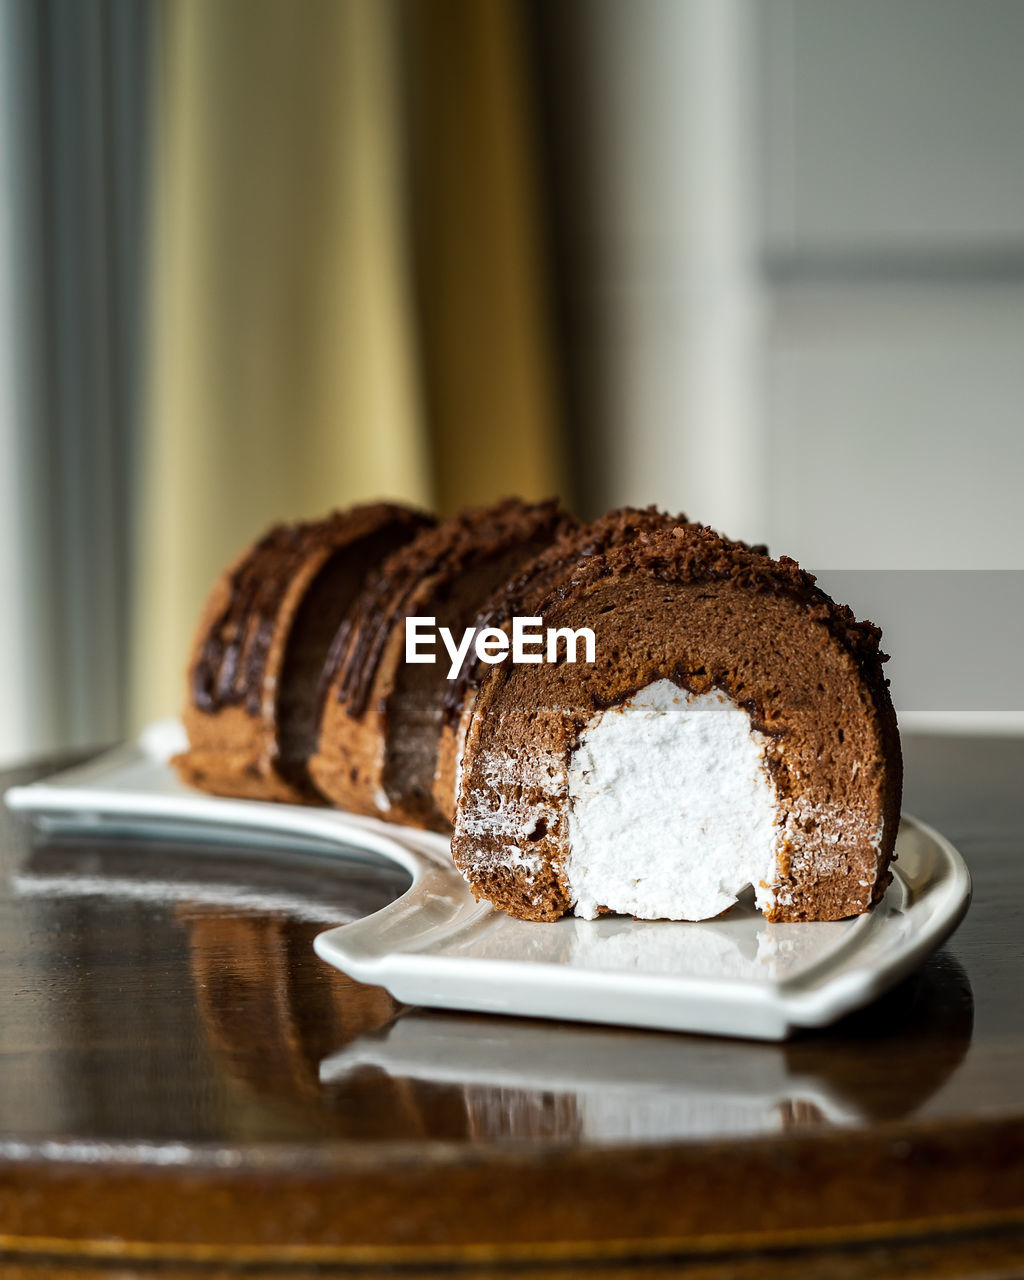 Chocolate roll with fresh cream on a white plate and wooden background